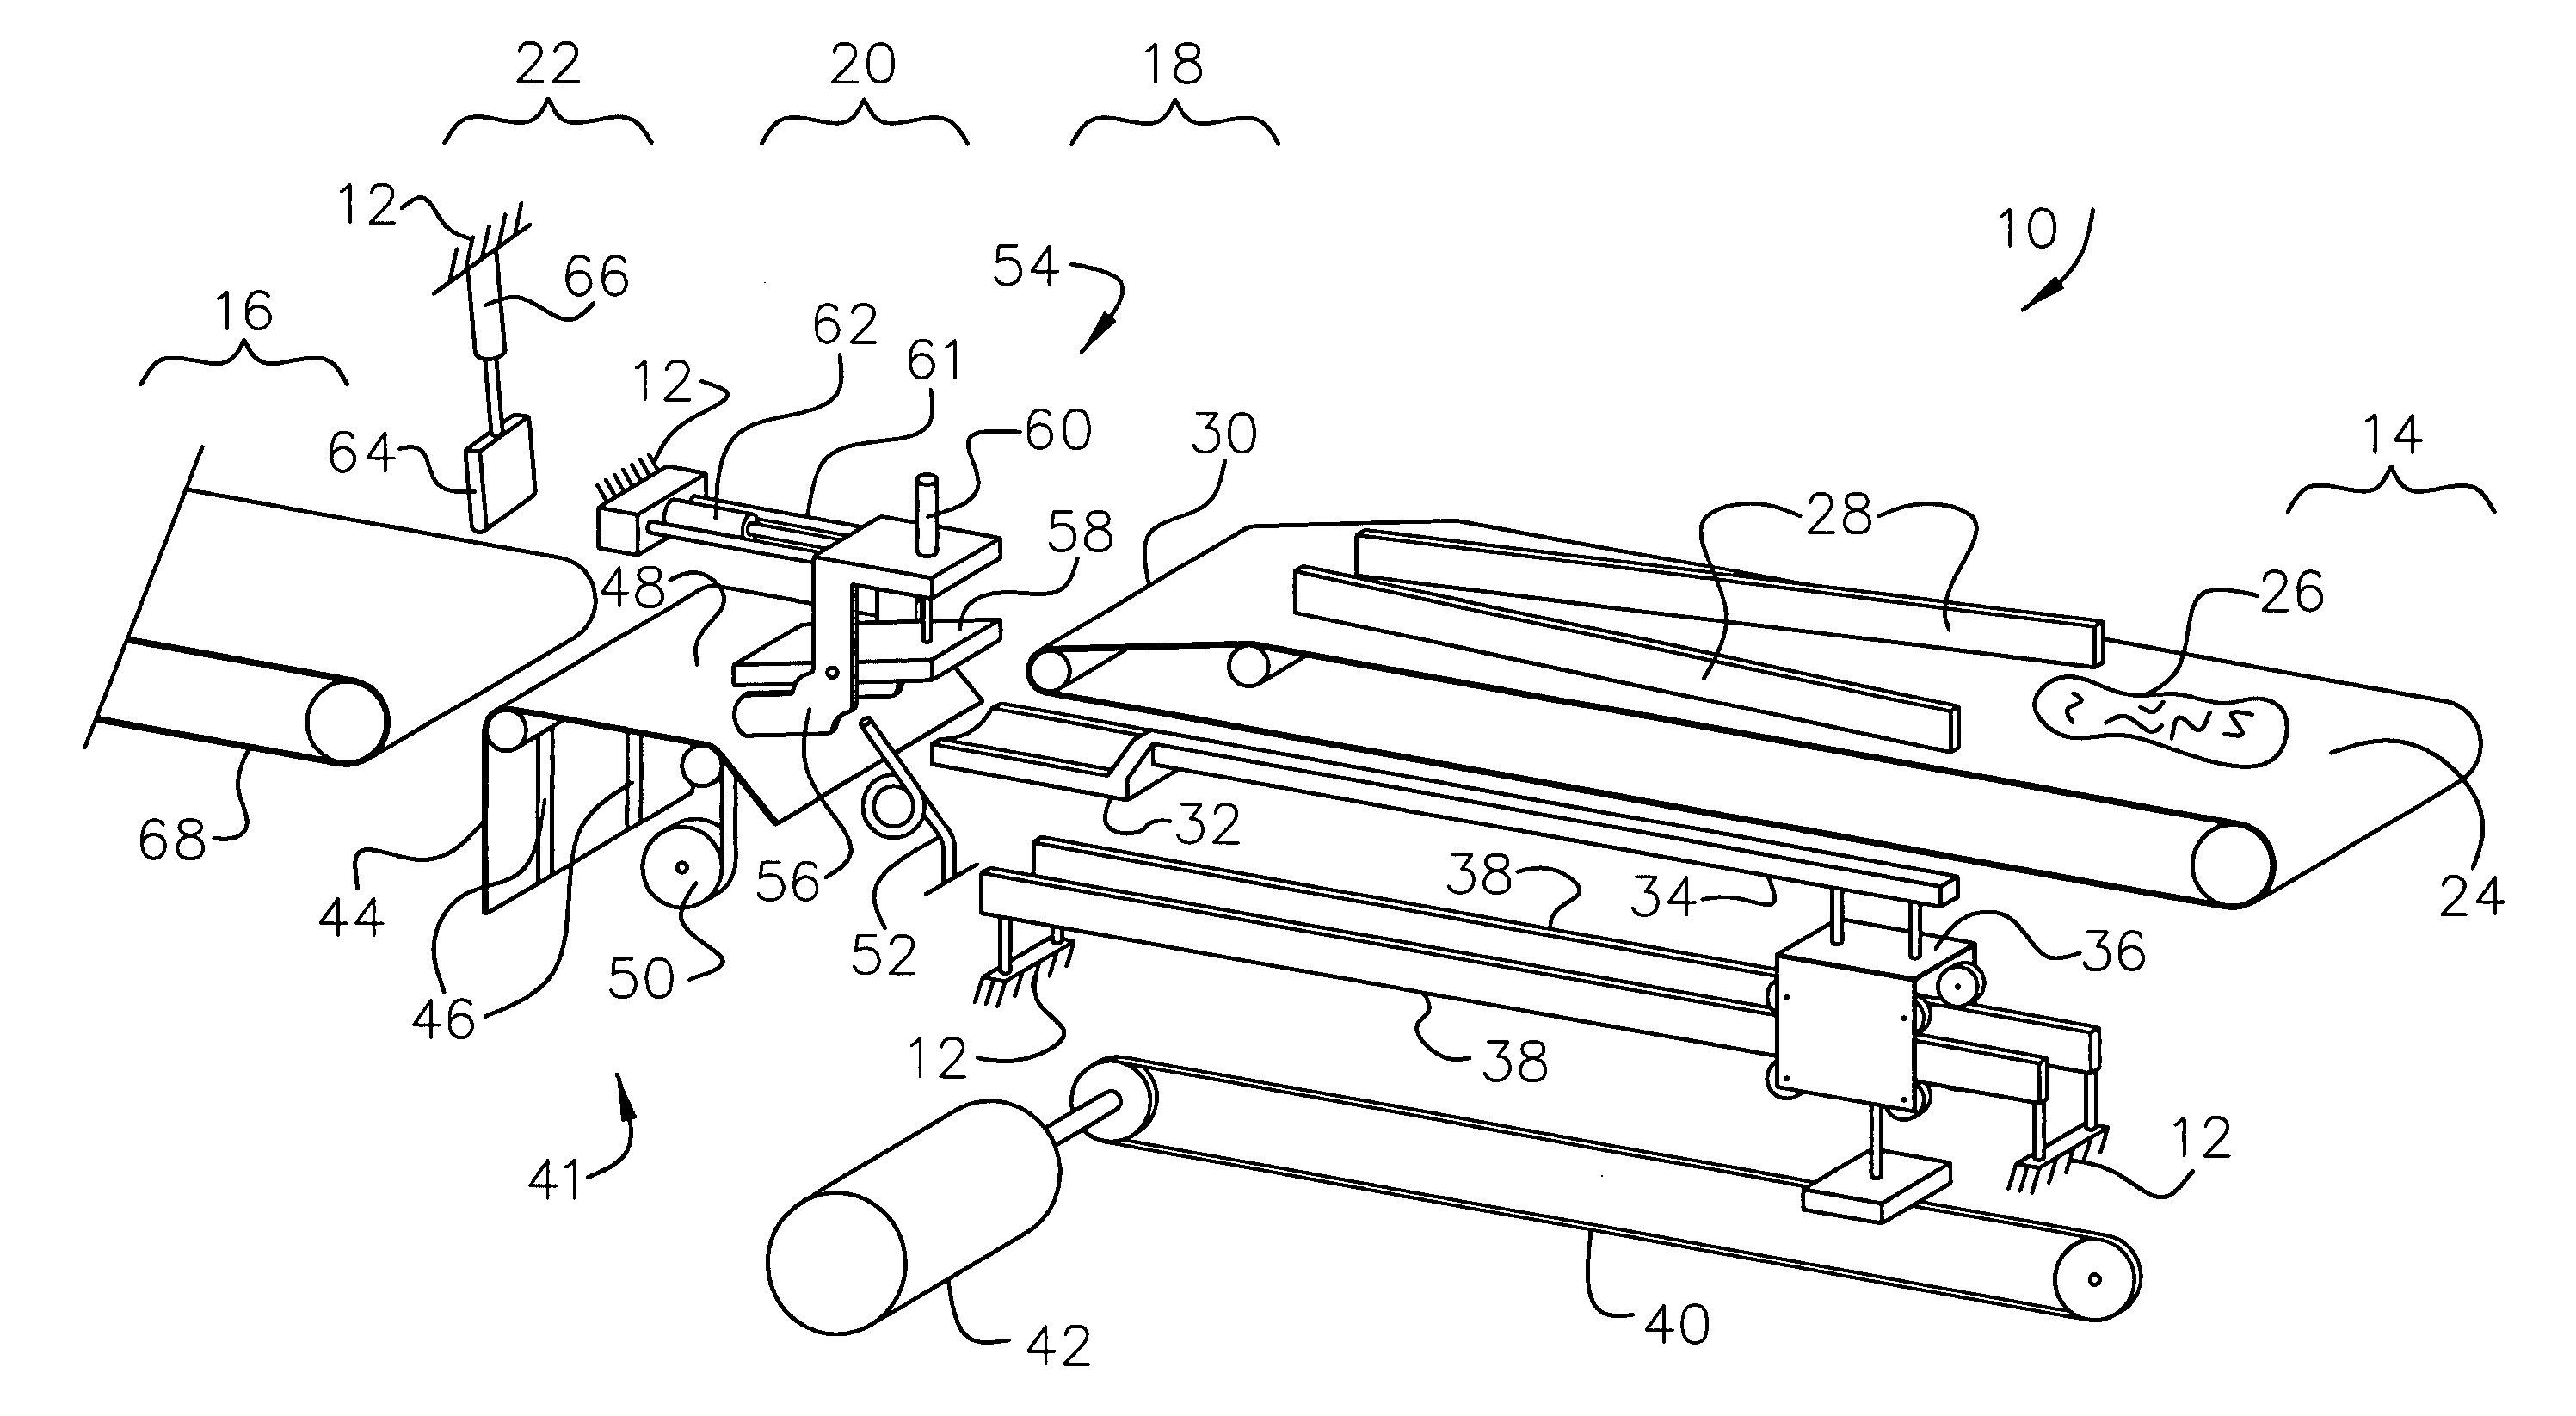 Food article packaging apparatus and method